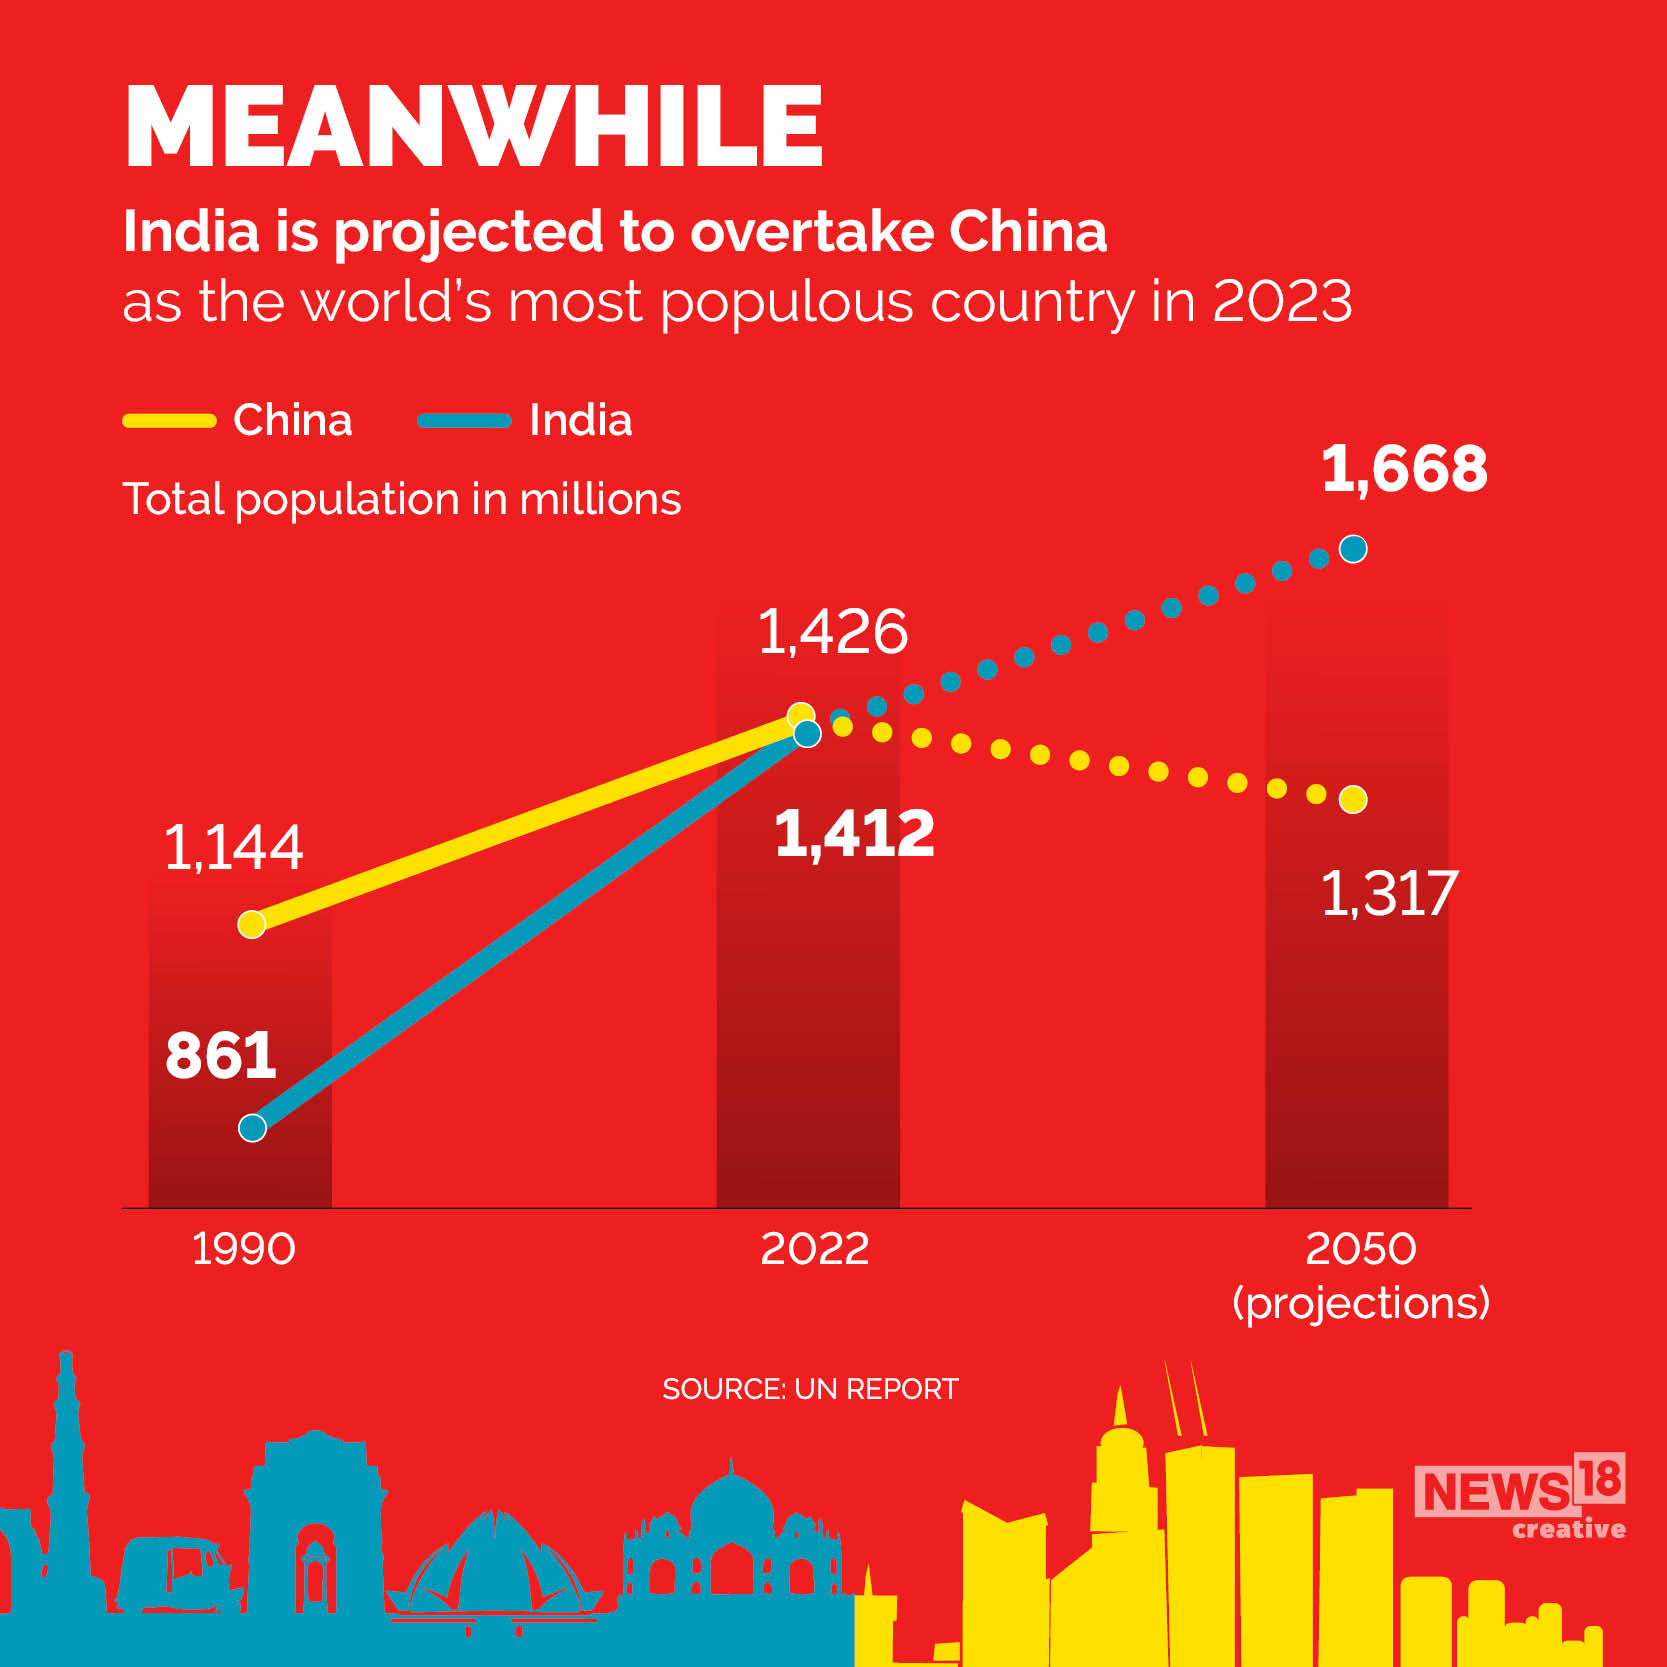 5 factors that led to decline in China's population